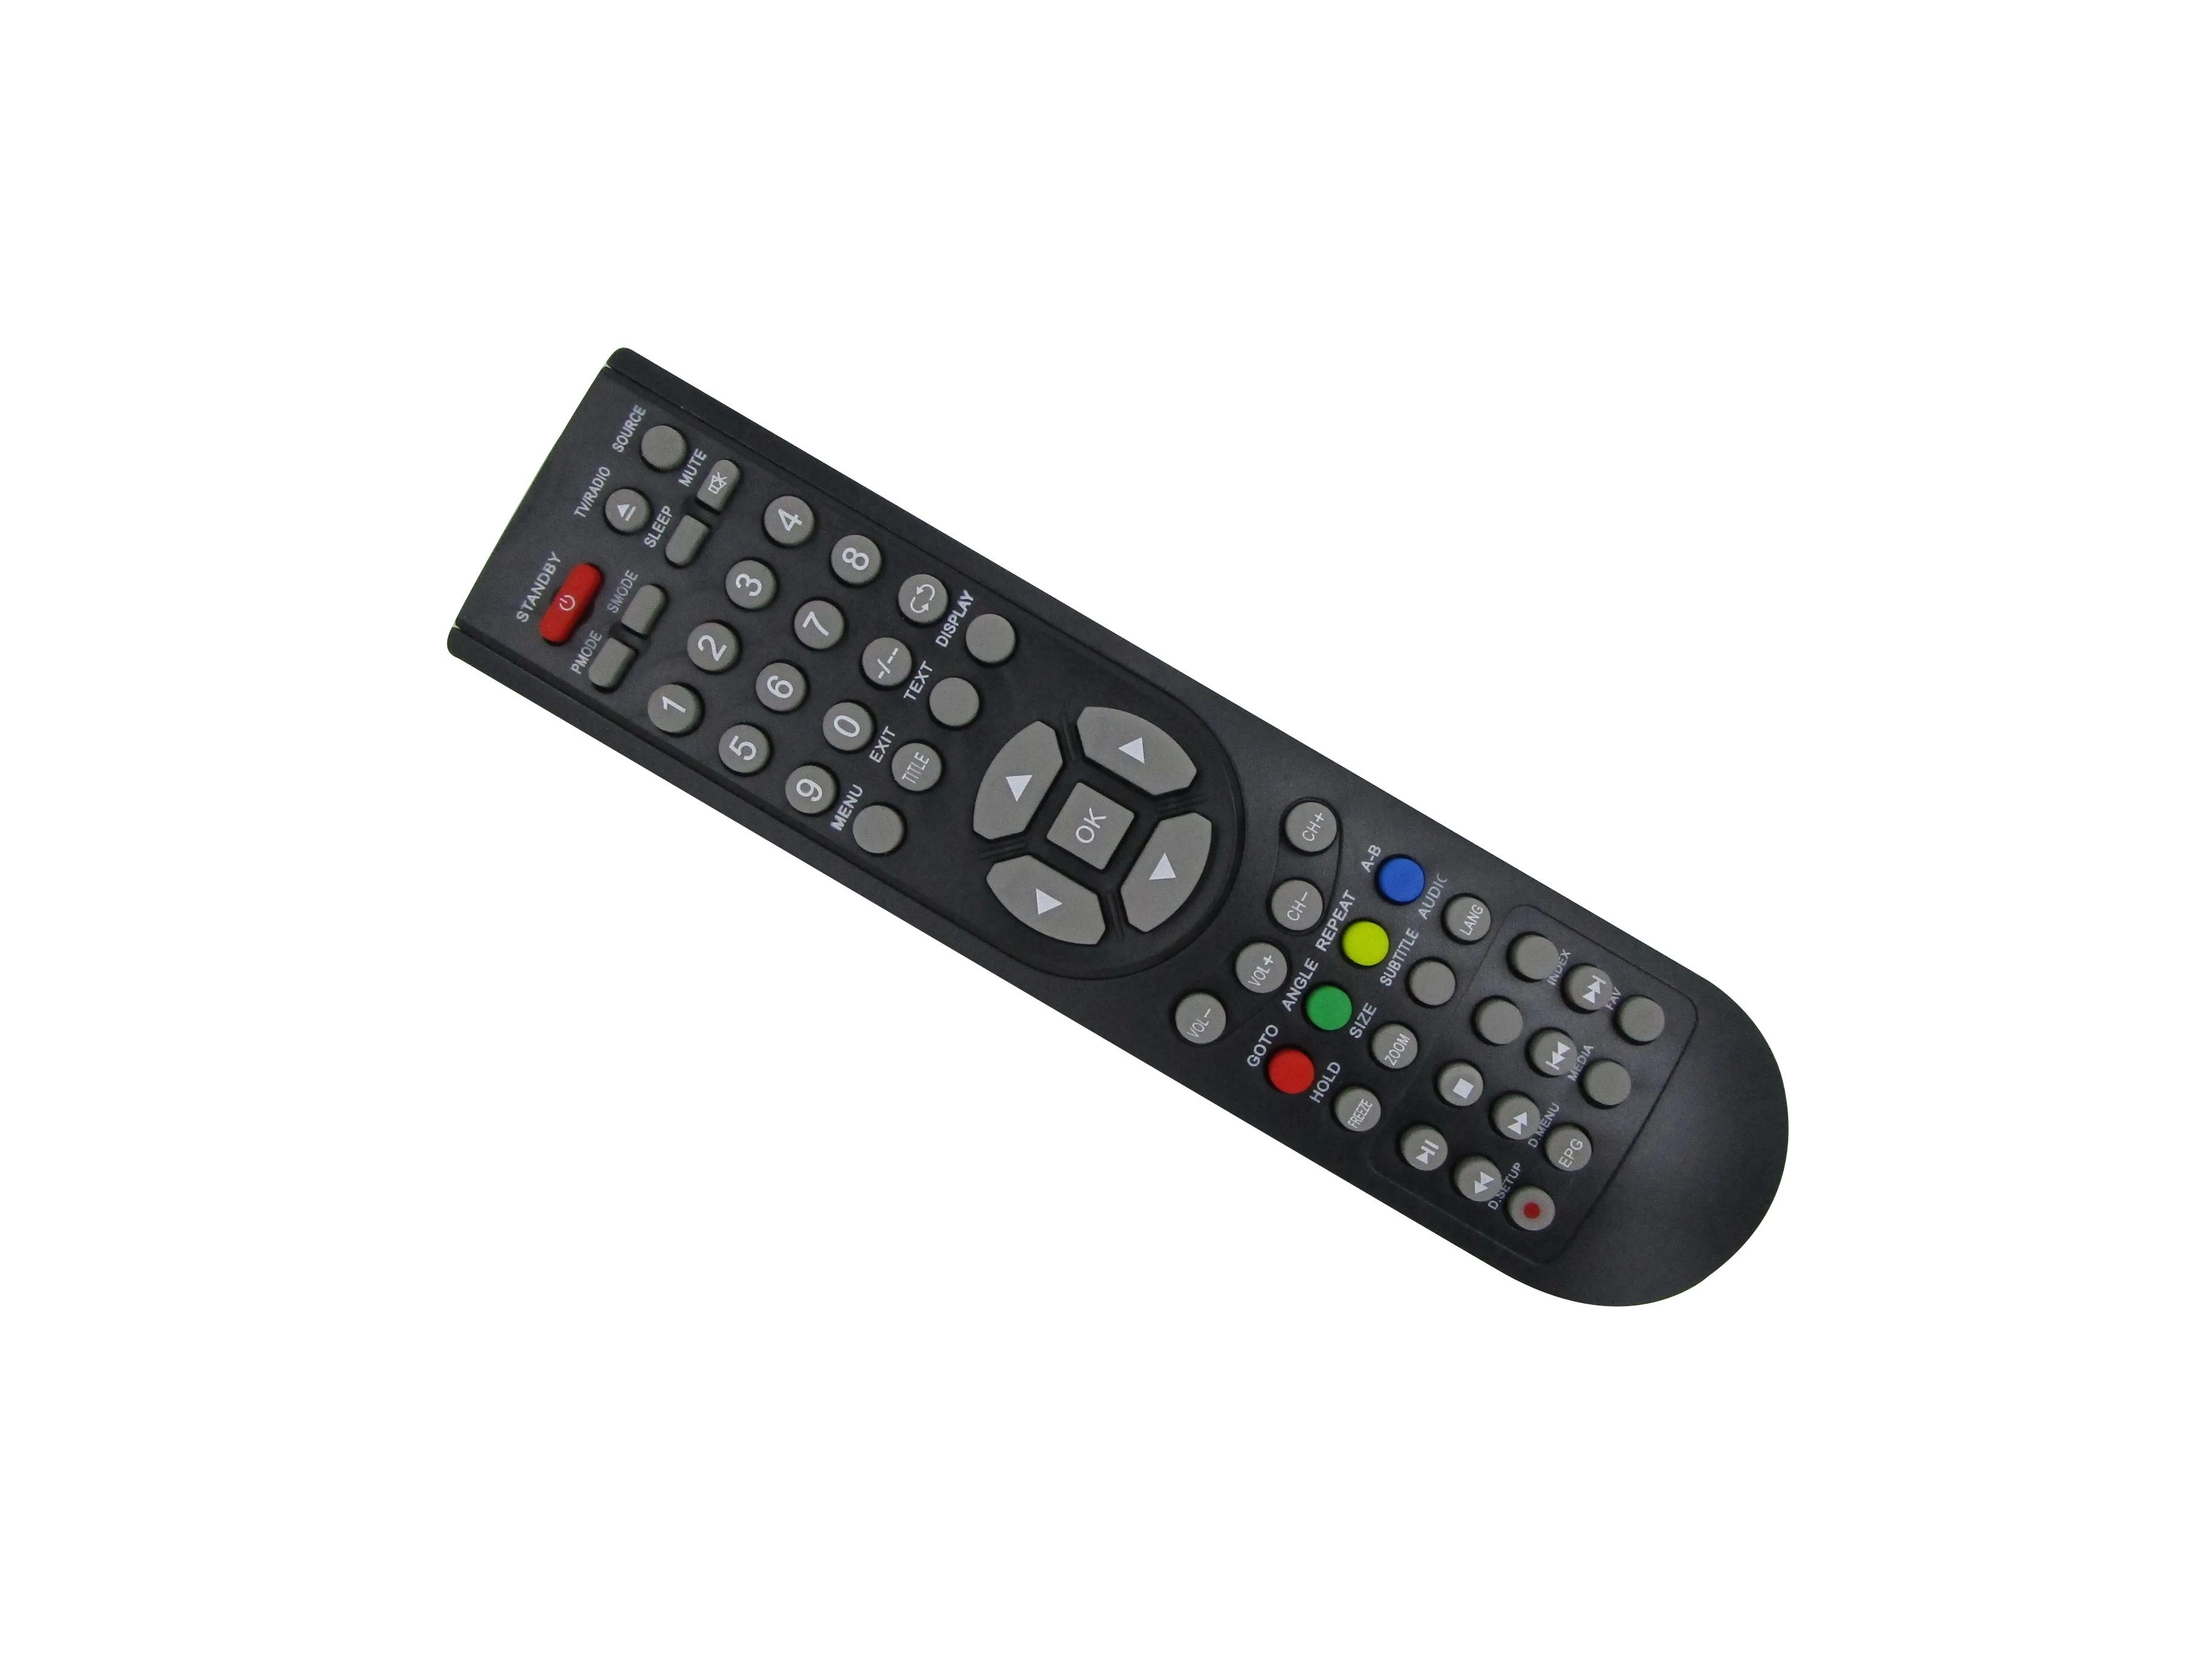 B.C. audience Walter Cunningham Remote Control For Hitachi DF2200 DF2200DV DF2300DV DF2400 DF2400DV  DF3200DV DH3200 DF4000DV & TELEFUNKEN LED LCD HDTV TV|Remote Controls| -  AliExpress